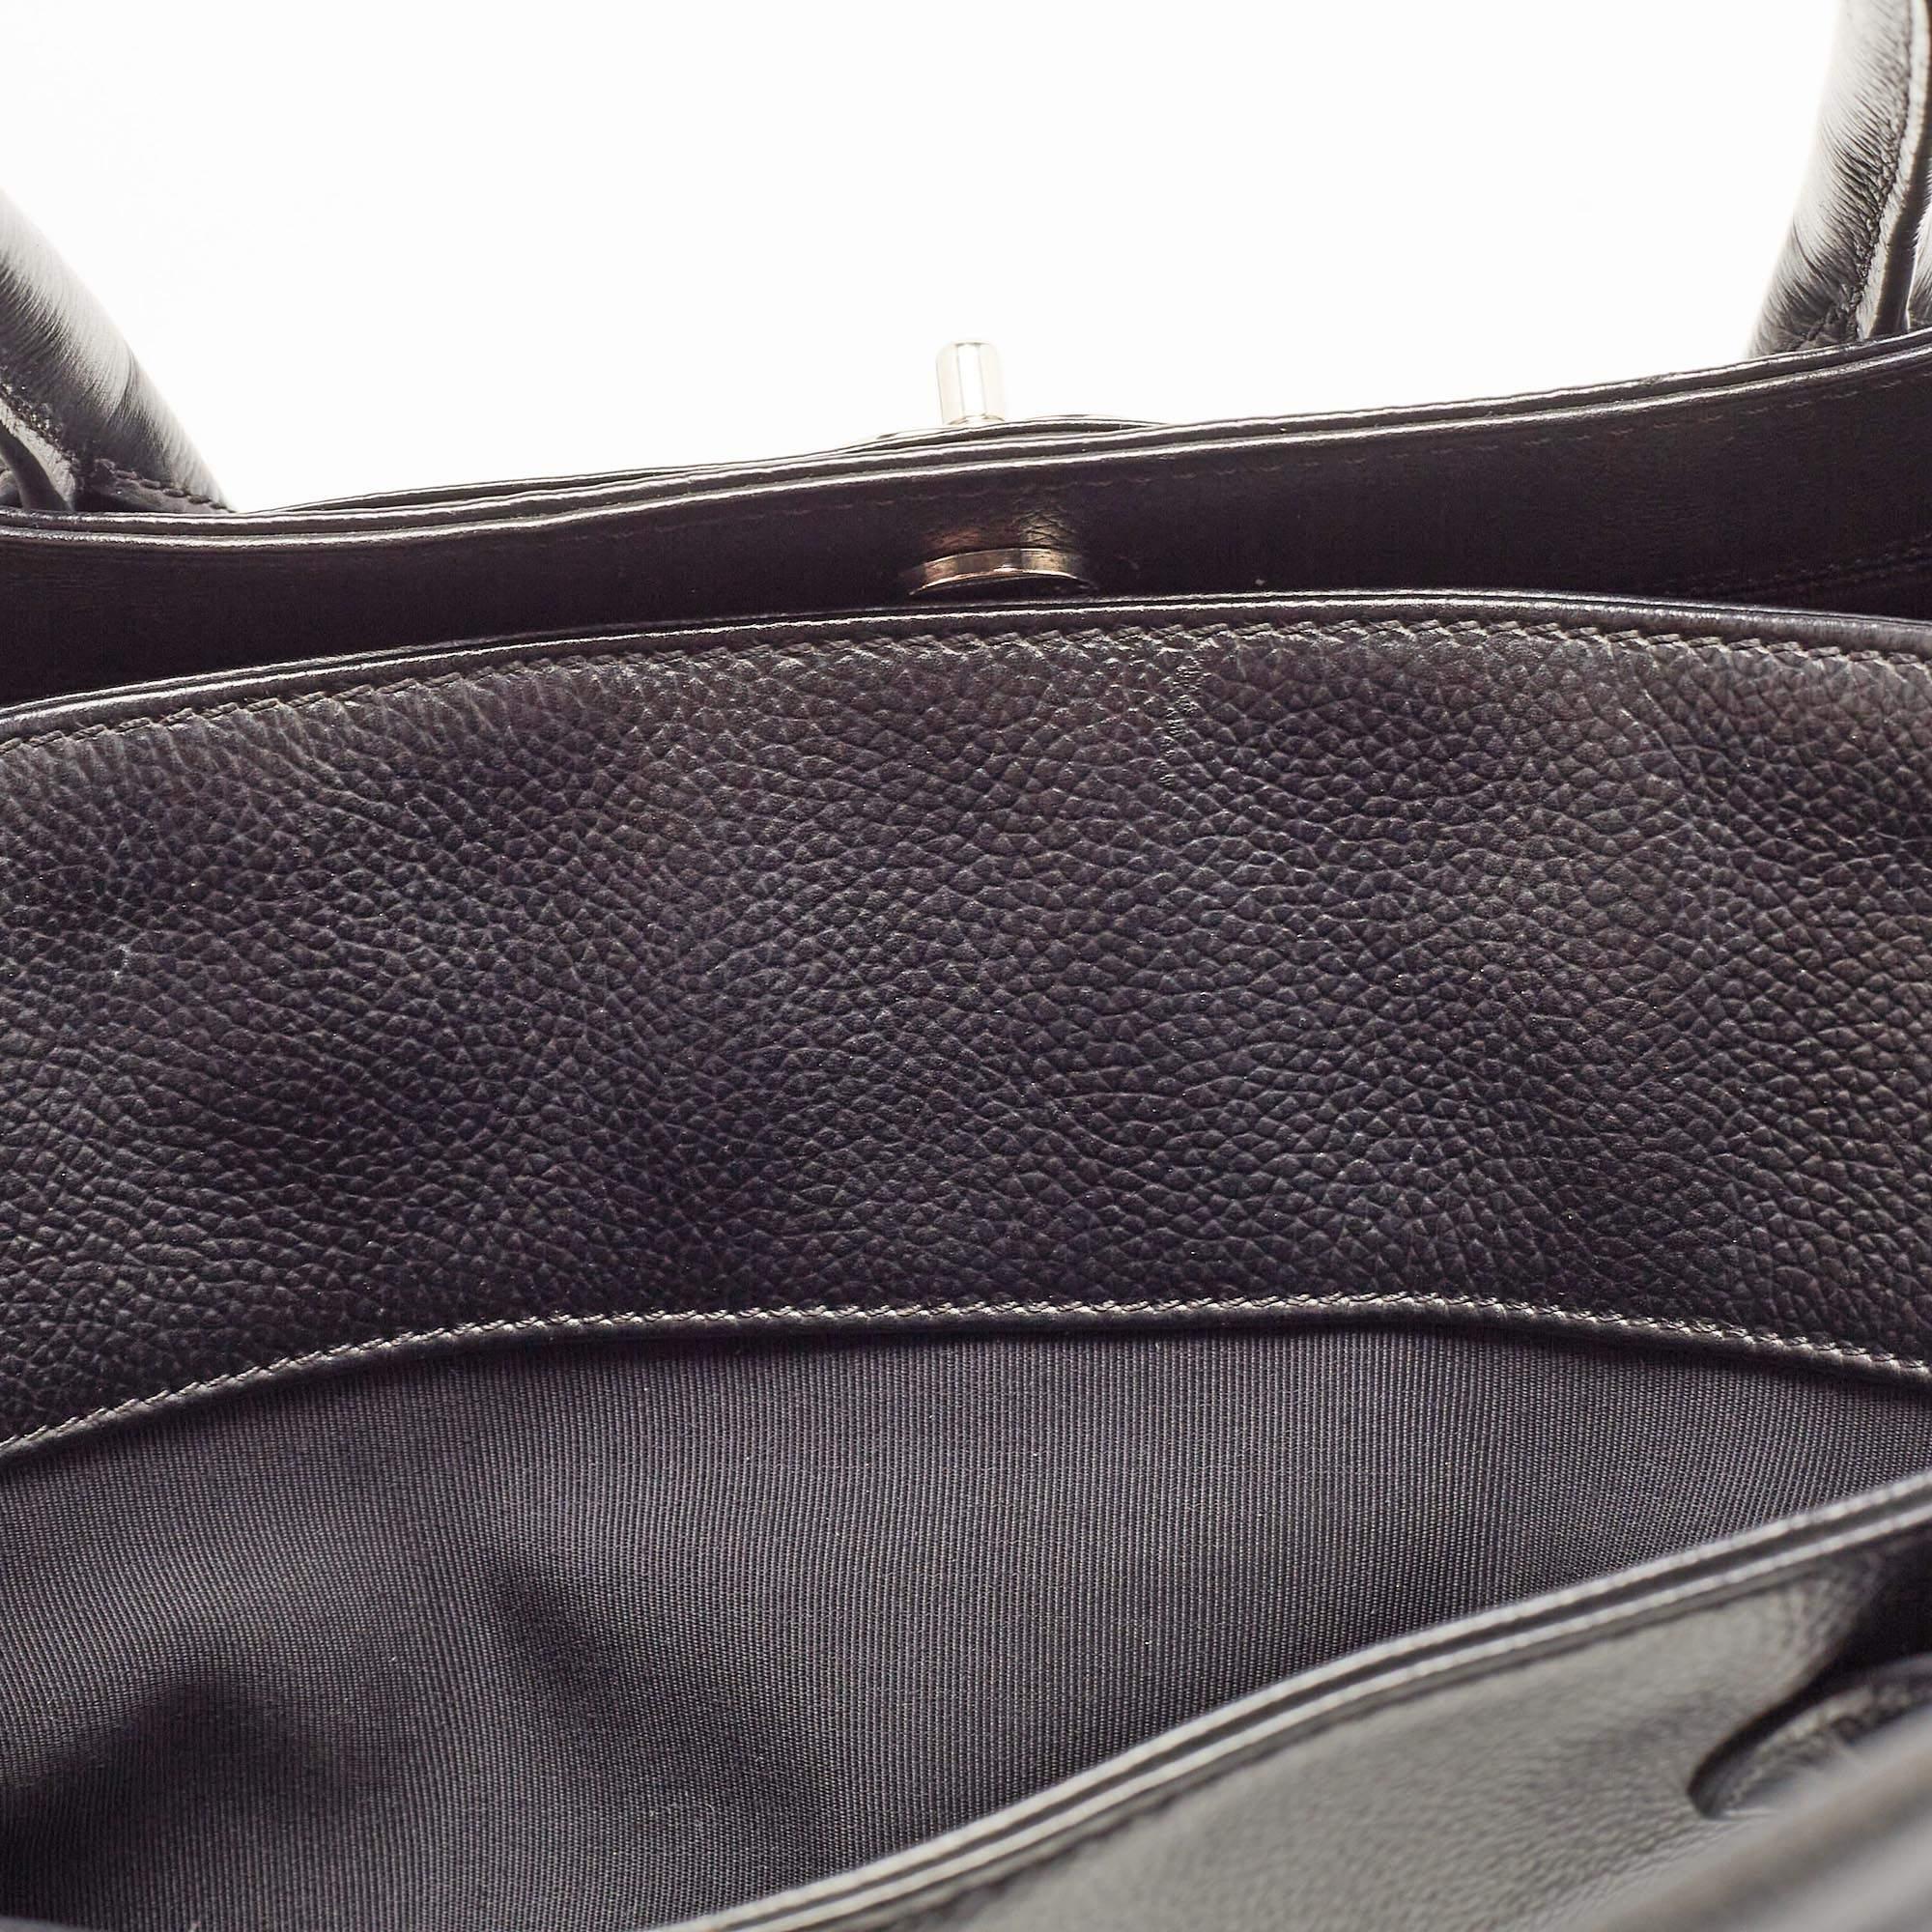 Chanel Black Leather Cerf Shopper Tote 8